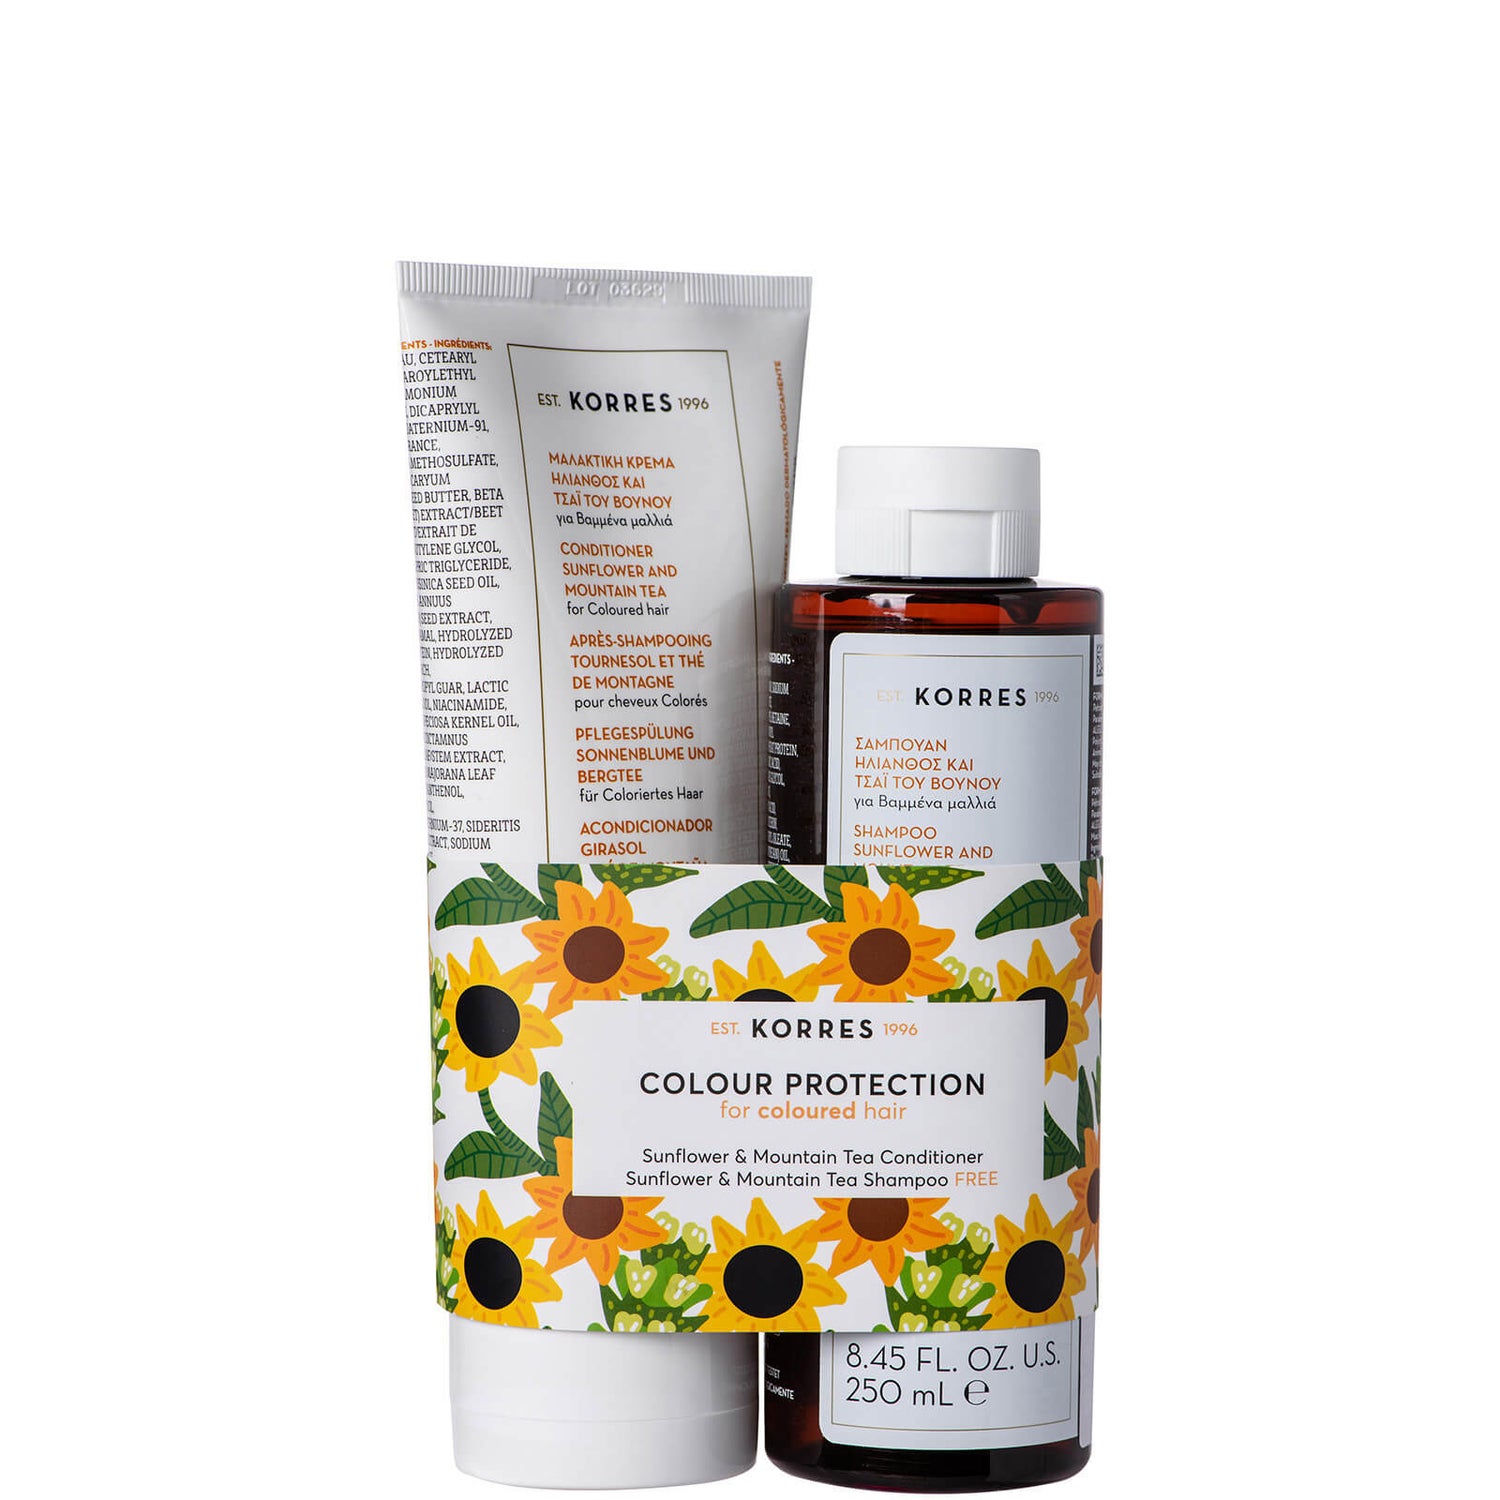 KORRES Sunflower & Mountain Tea Kit Conditioner and Shampoo Duo (Worth £31.00)